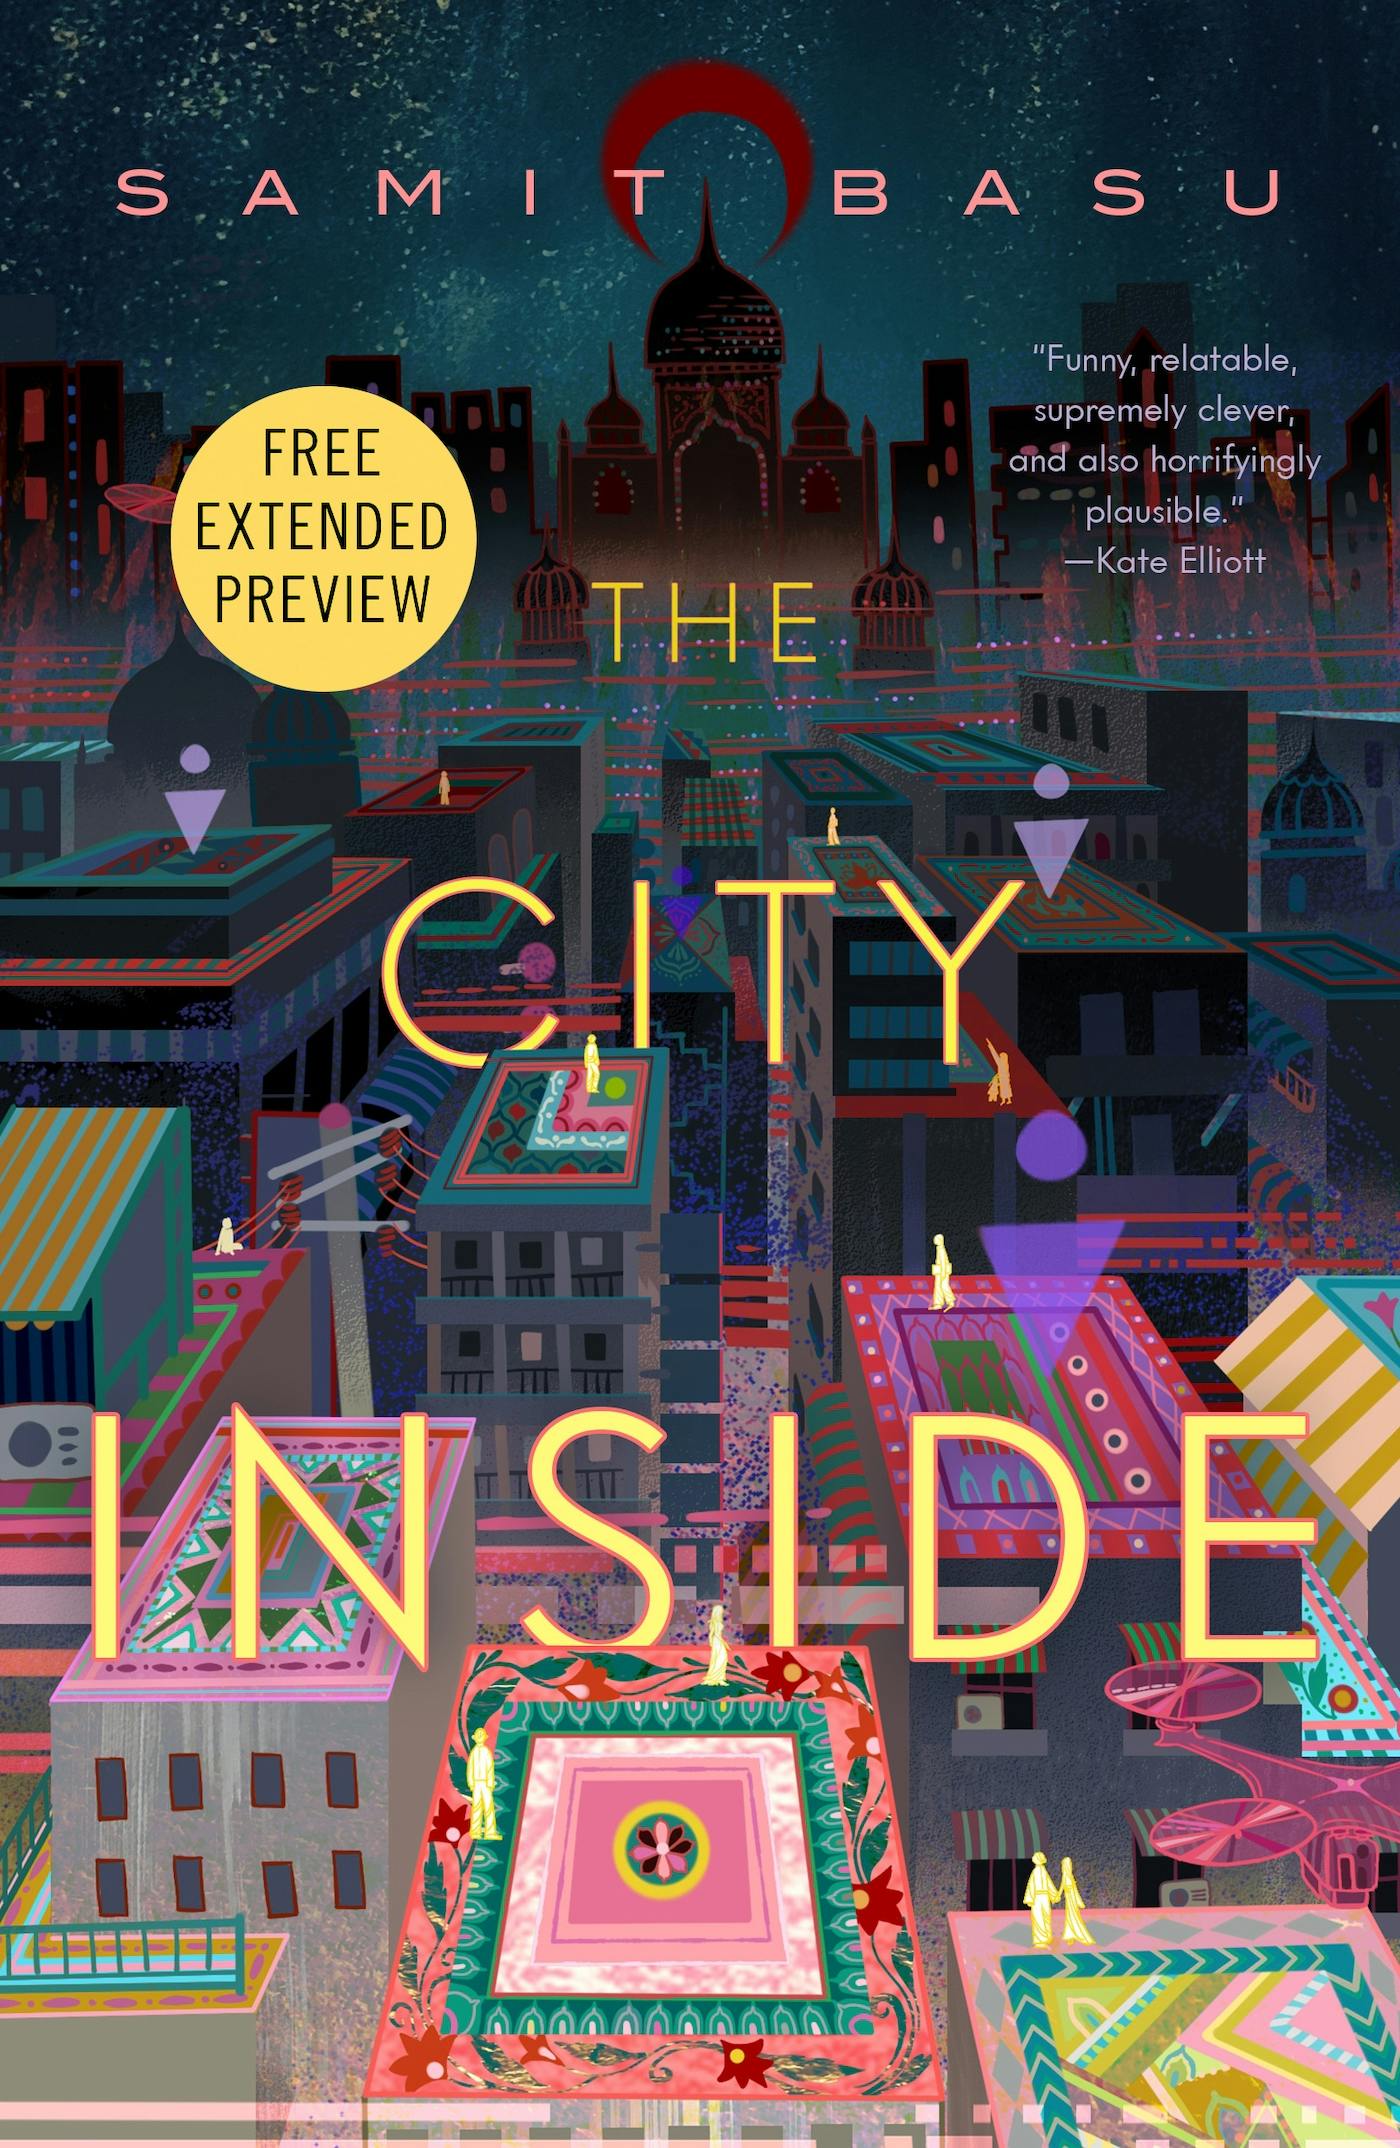 Cover for the book titled as: The City Inside Sneak Peek